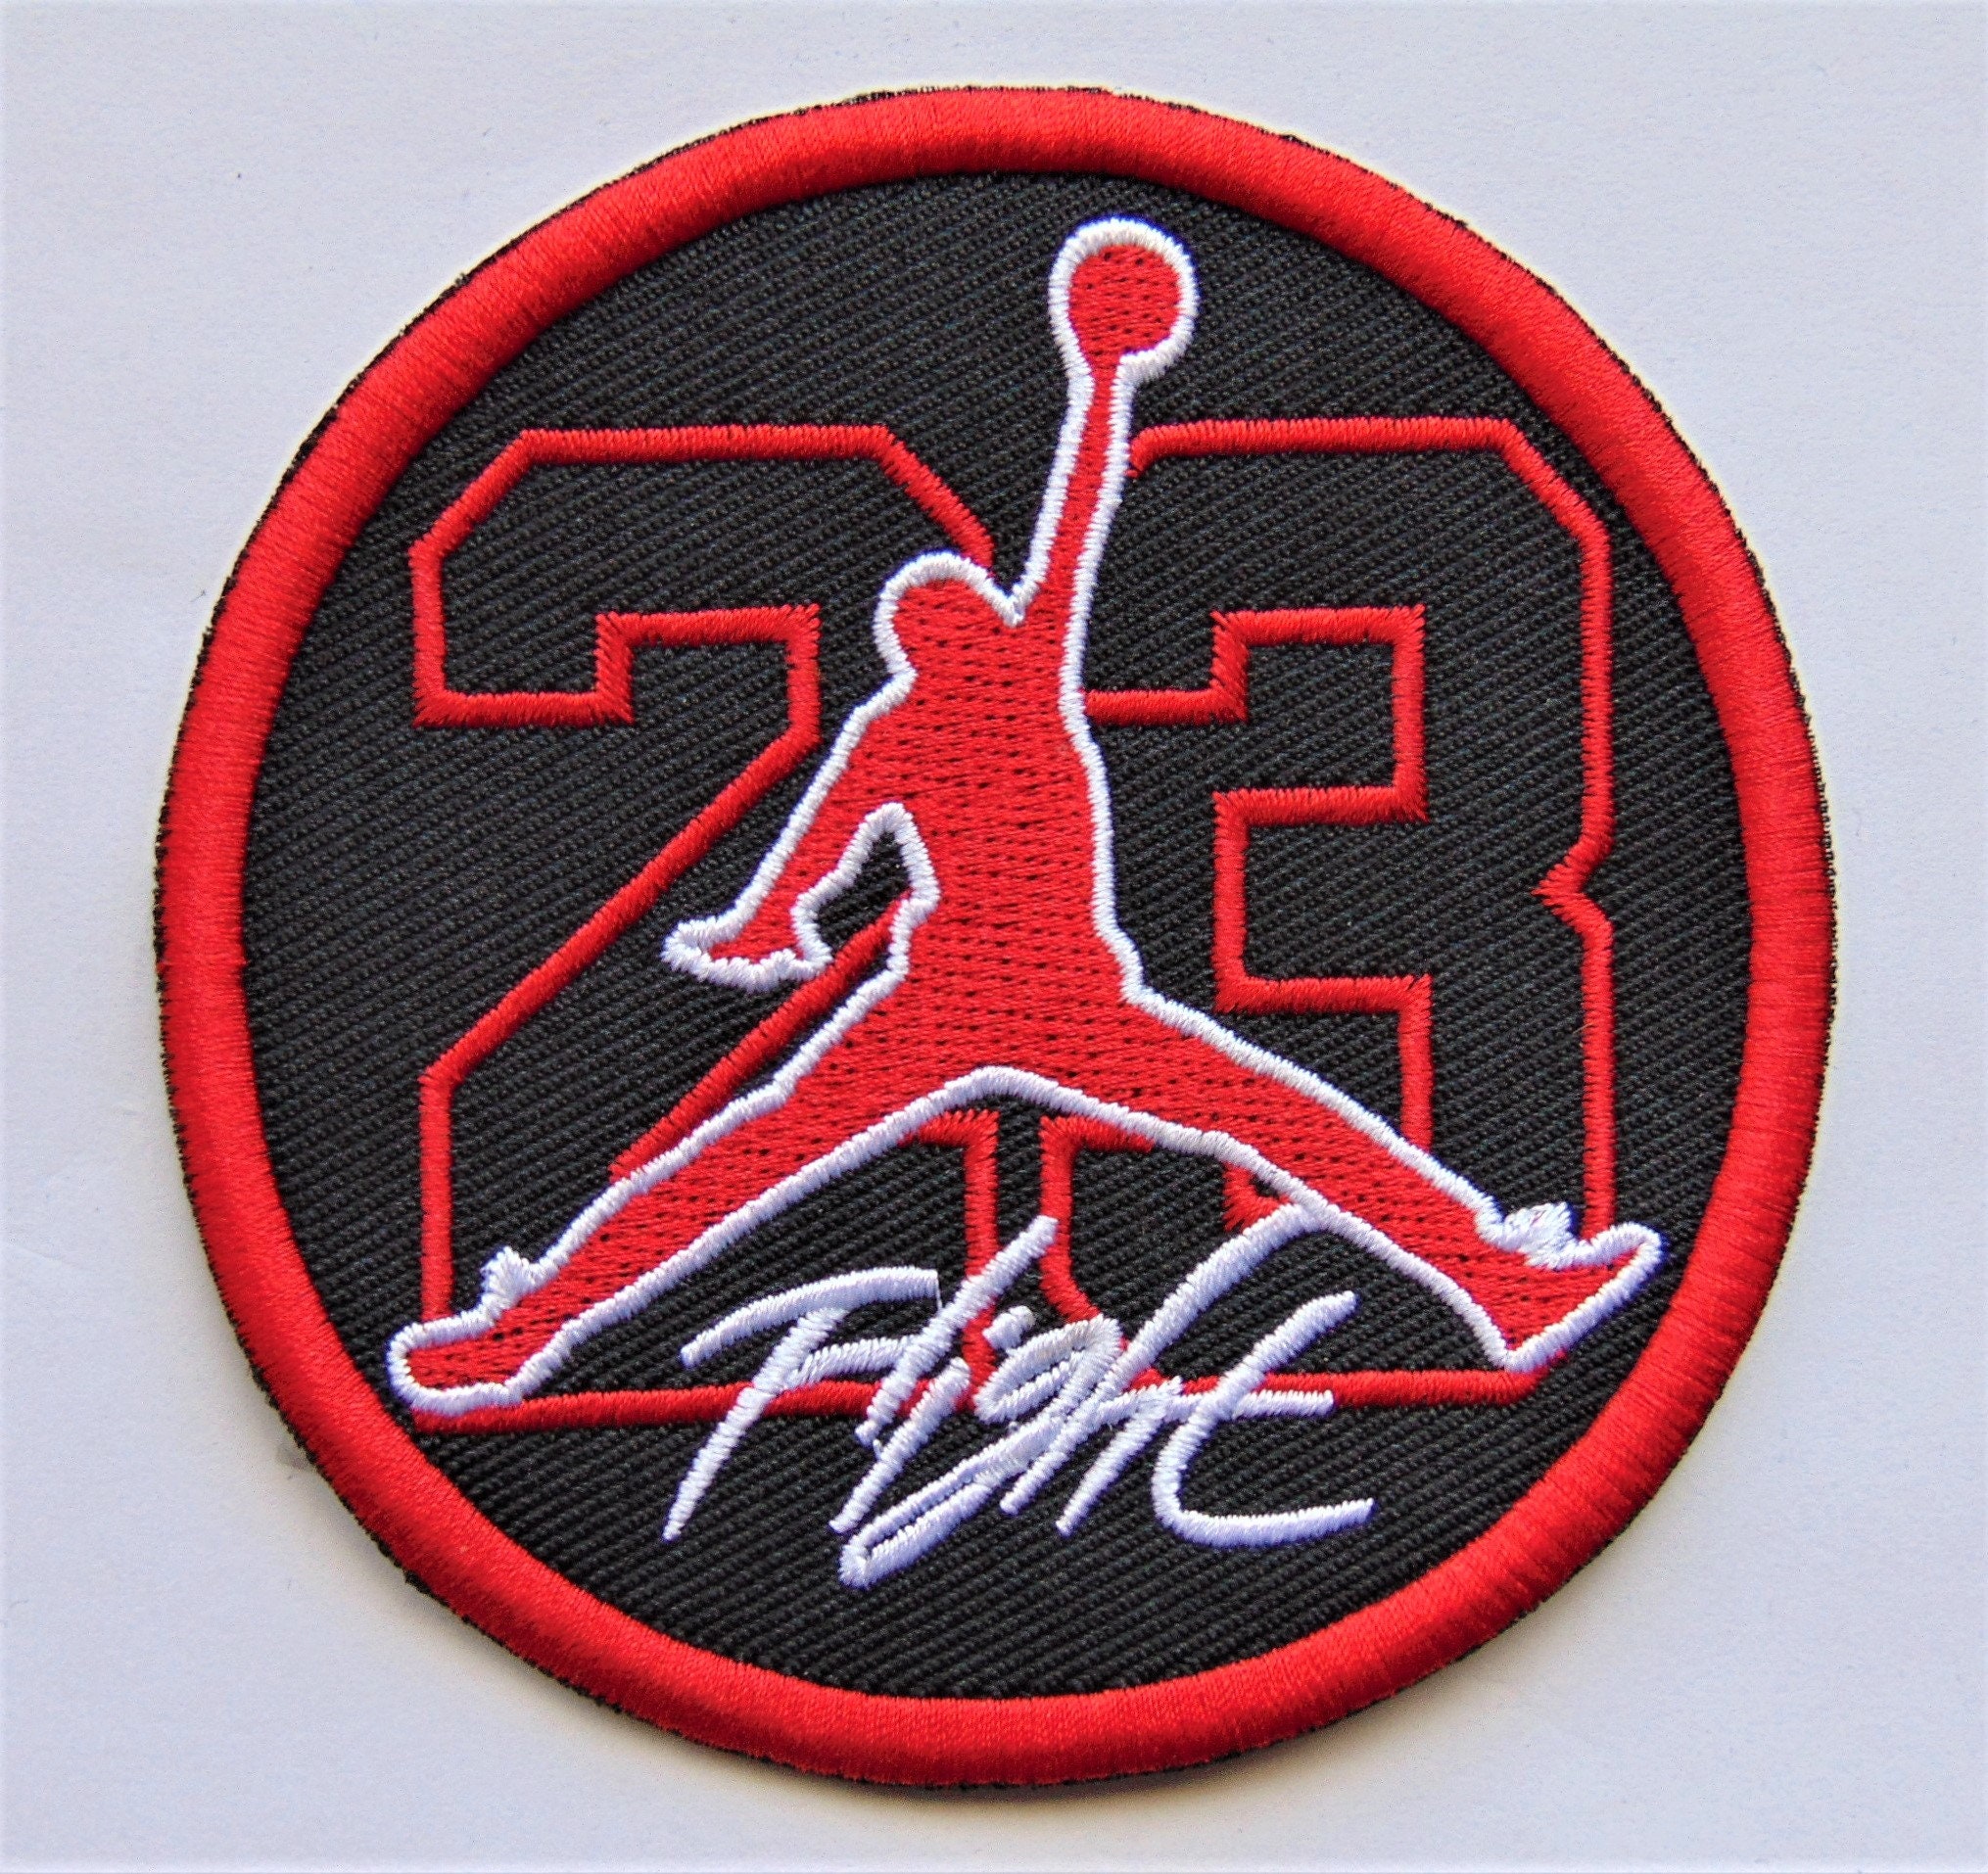 Nike embroidered iron on sew on patch badge logo sports applique